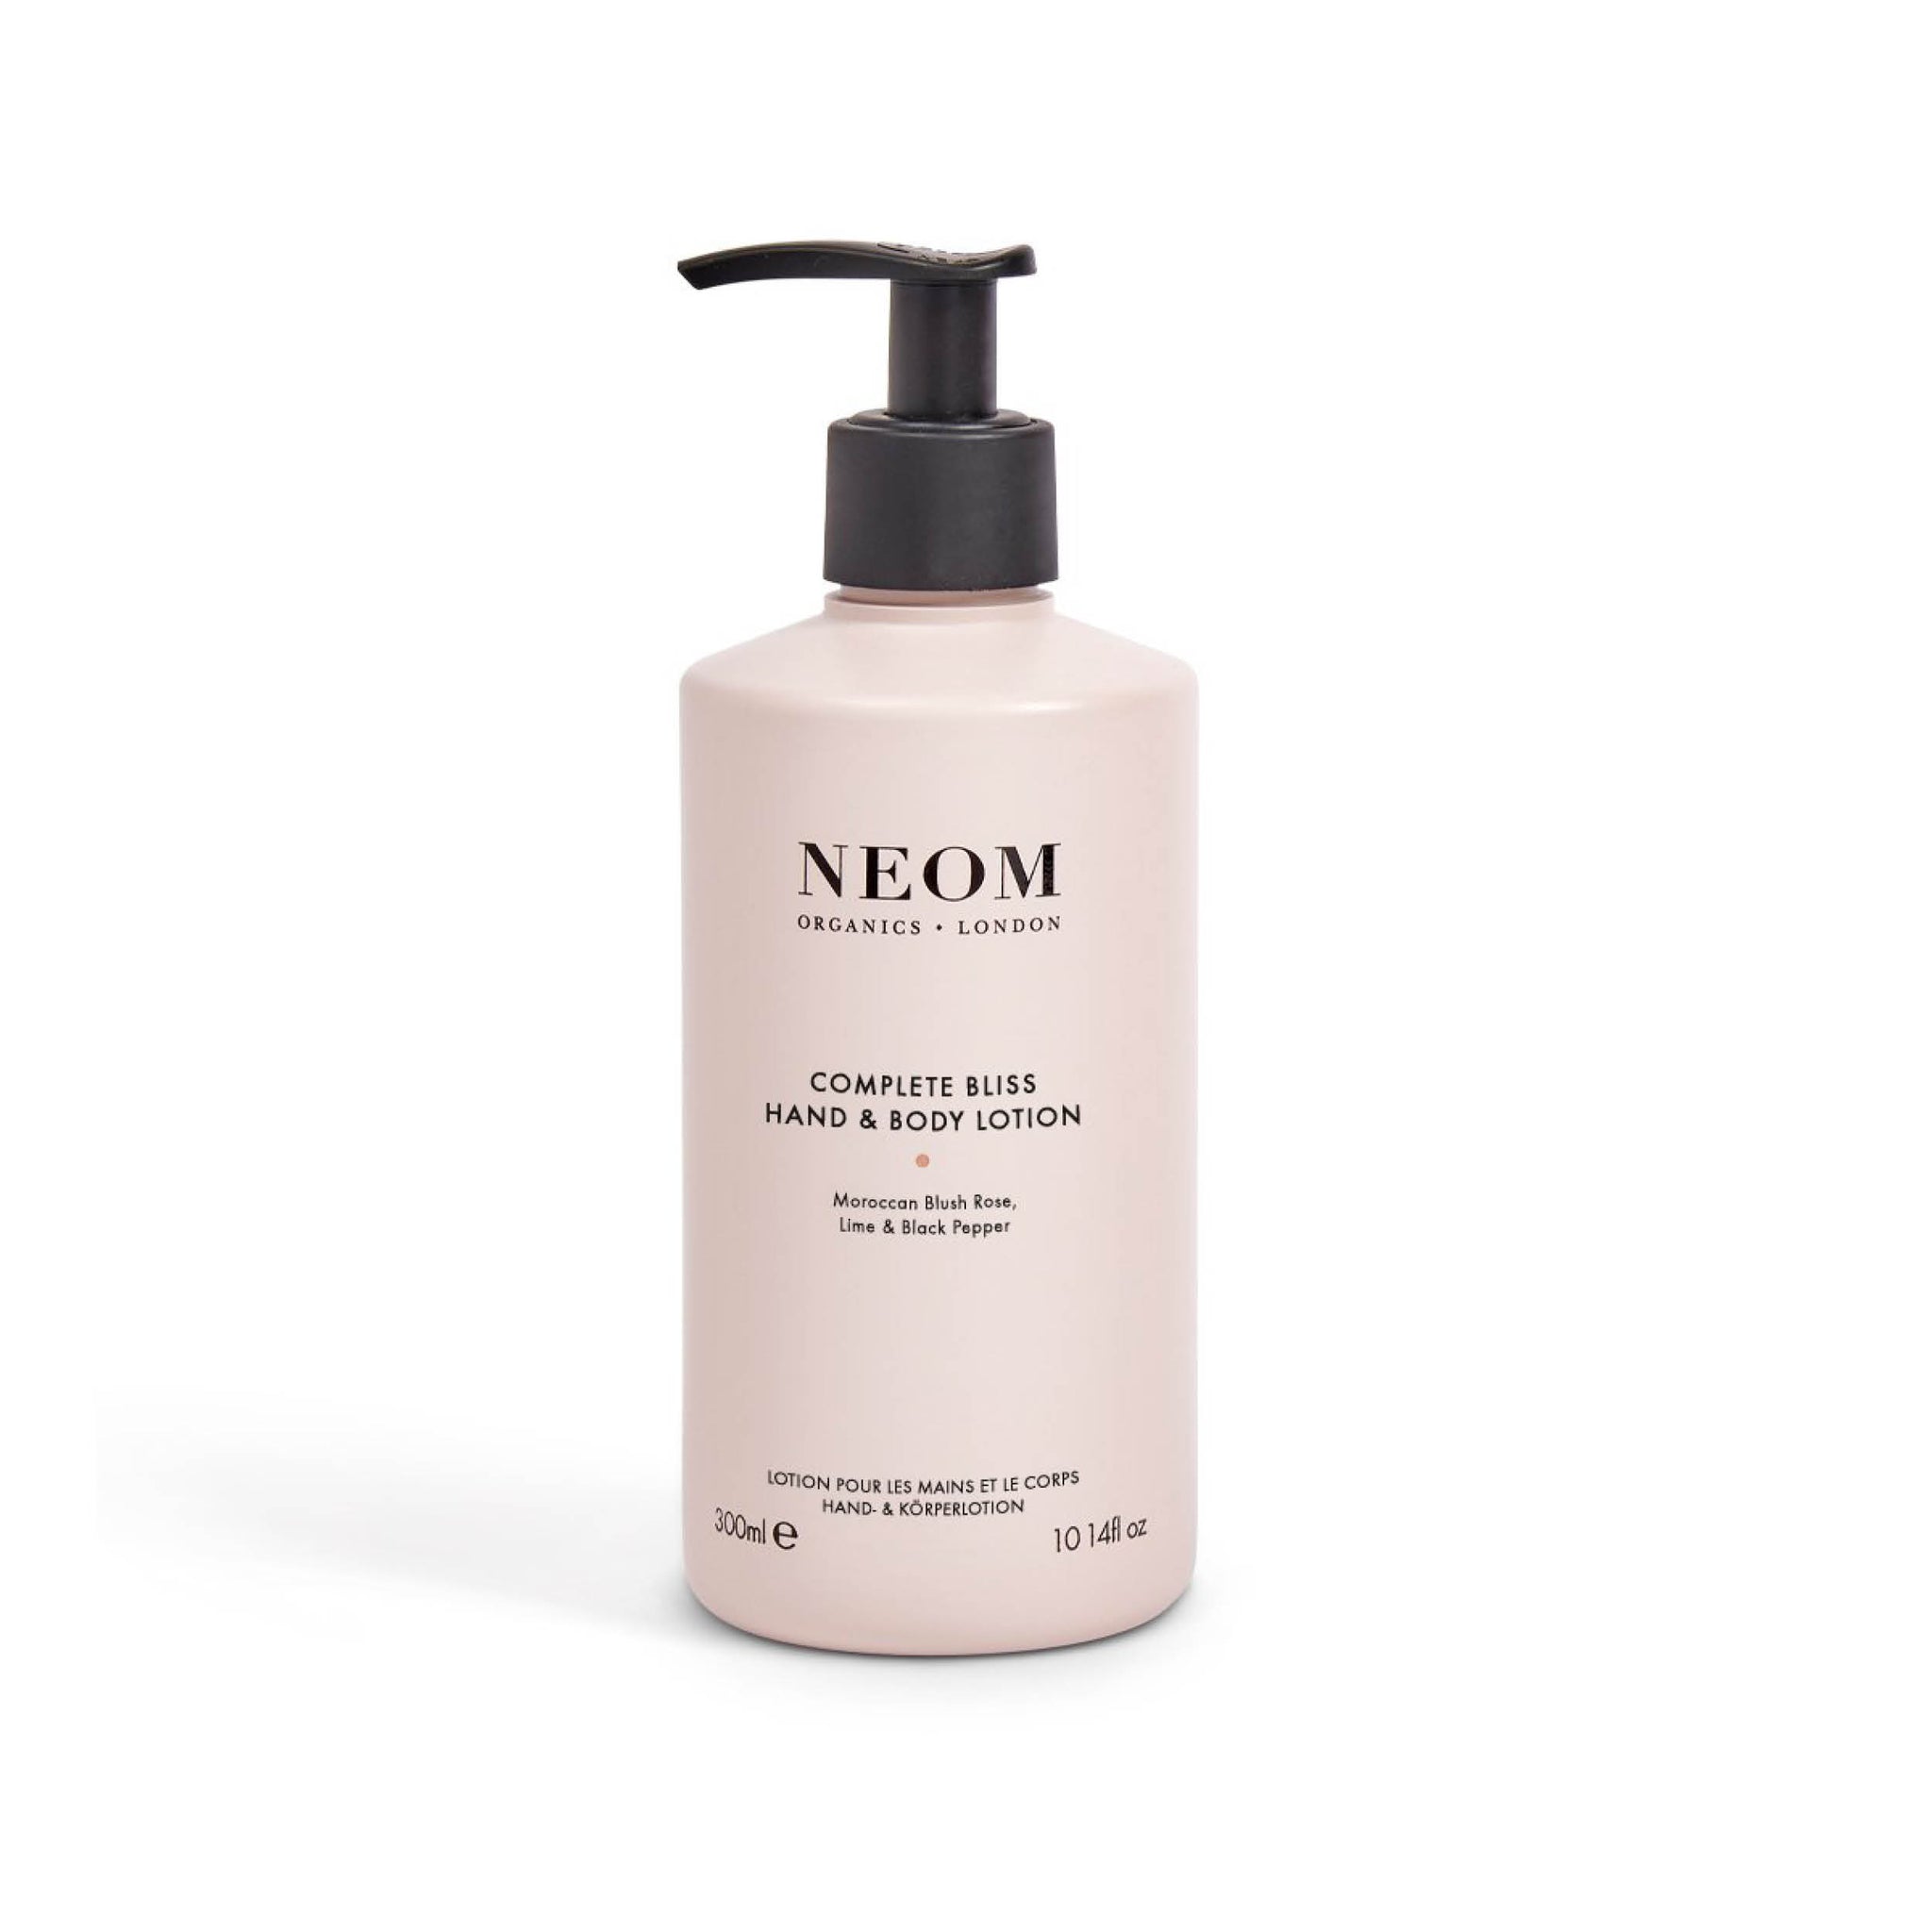 Neom Complete Bliss Hand & Body Lotion